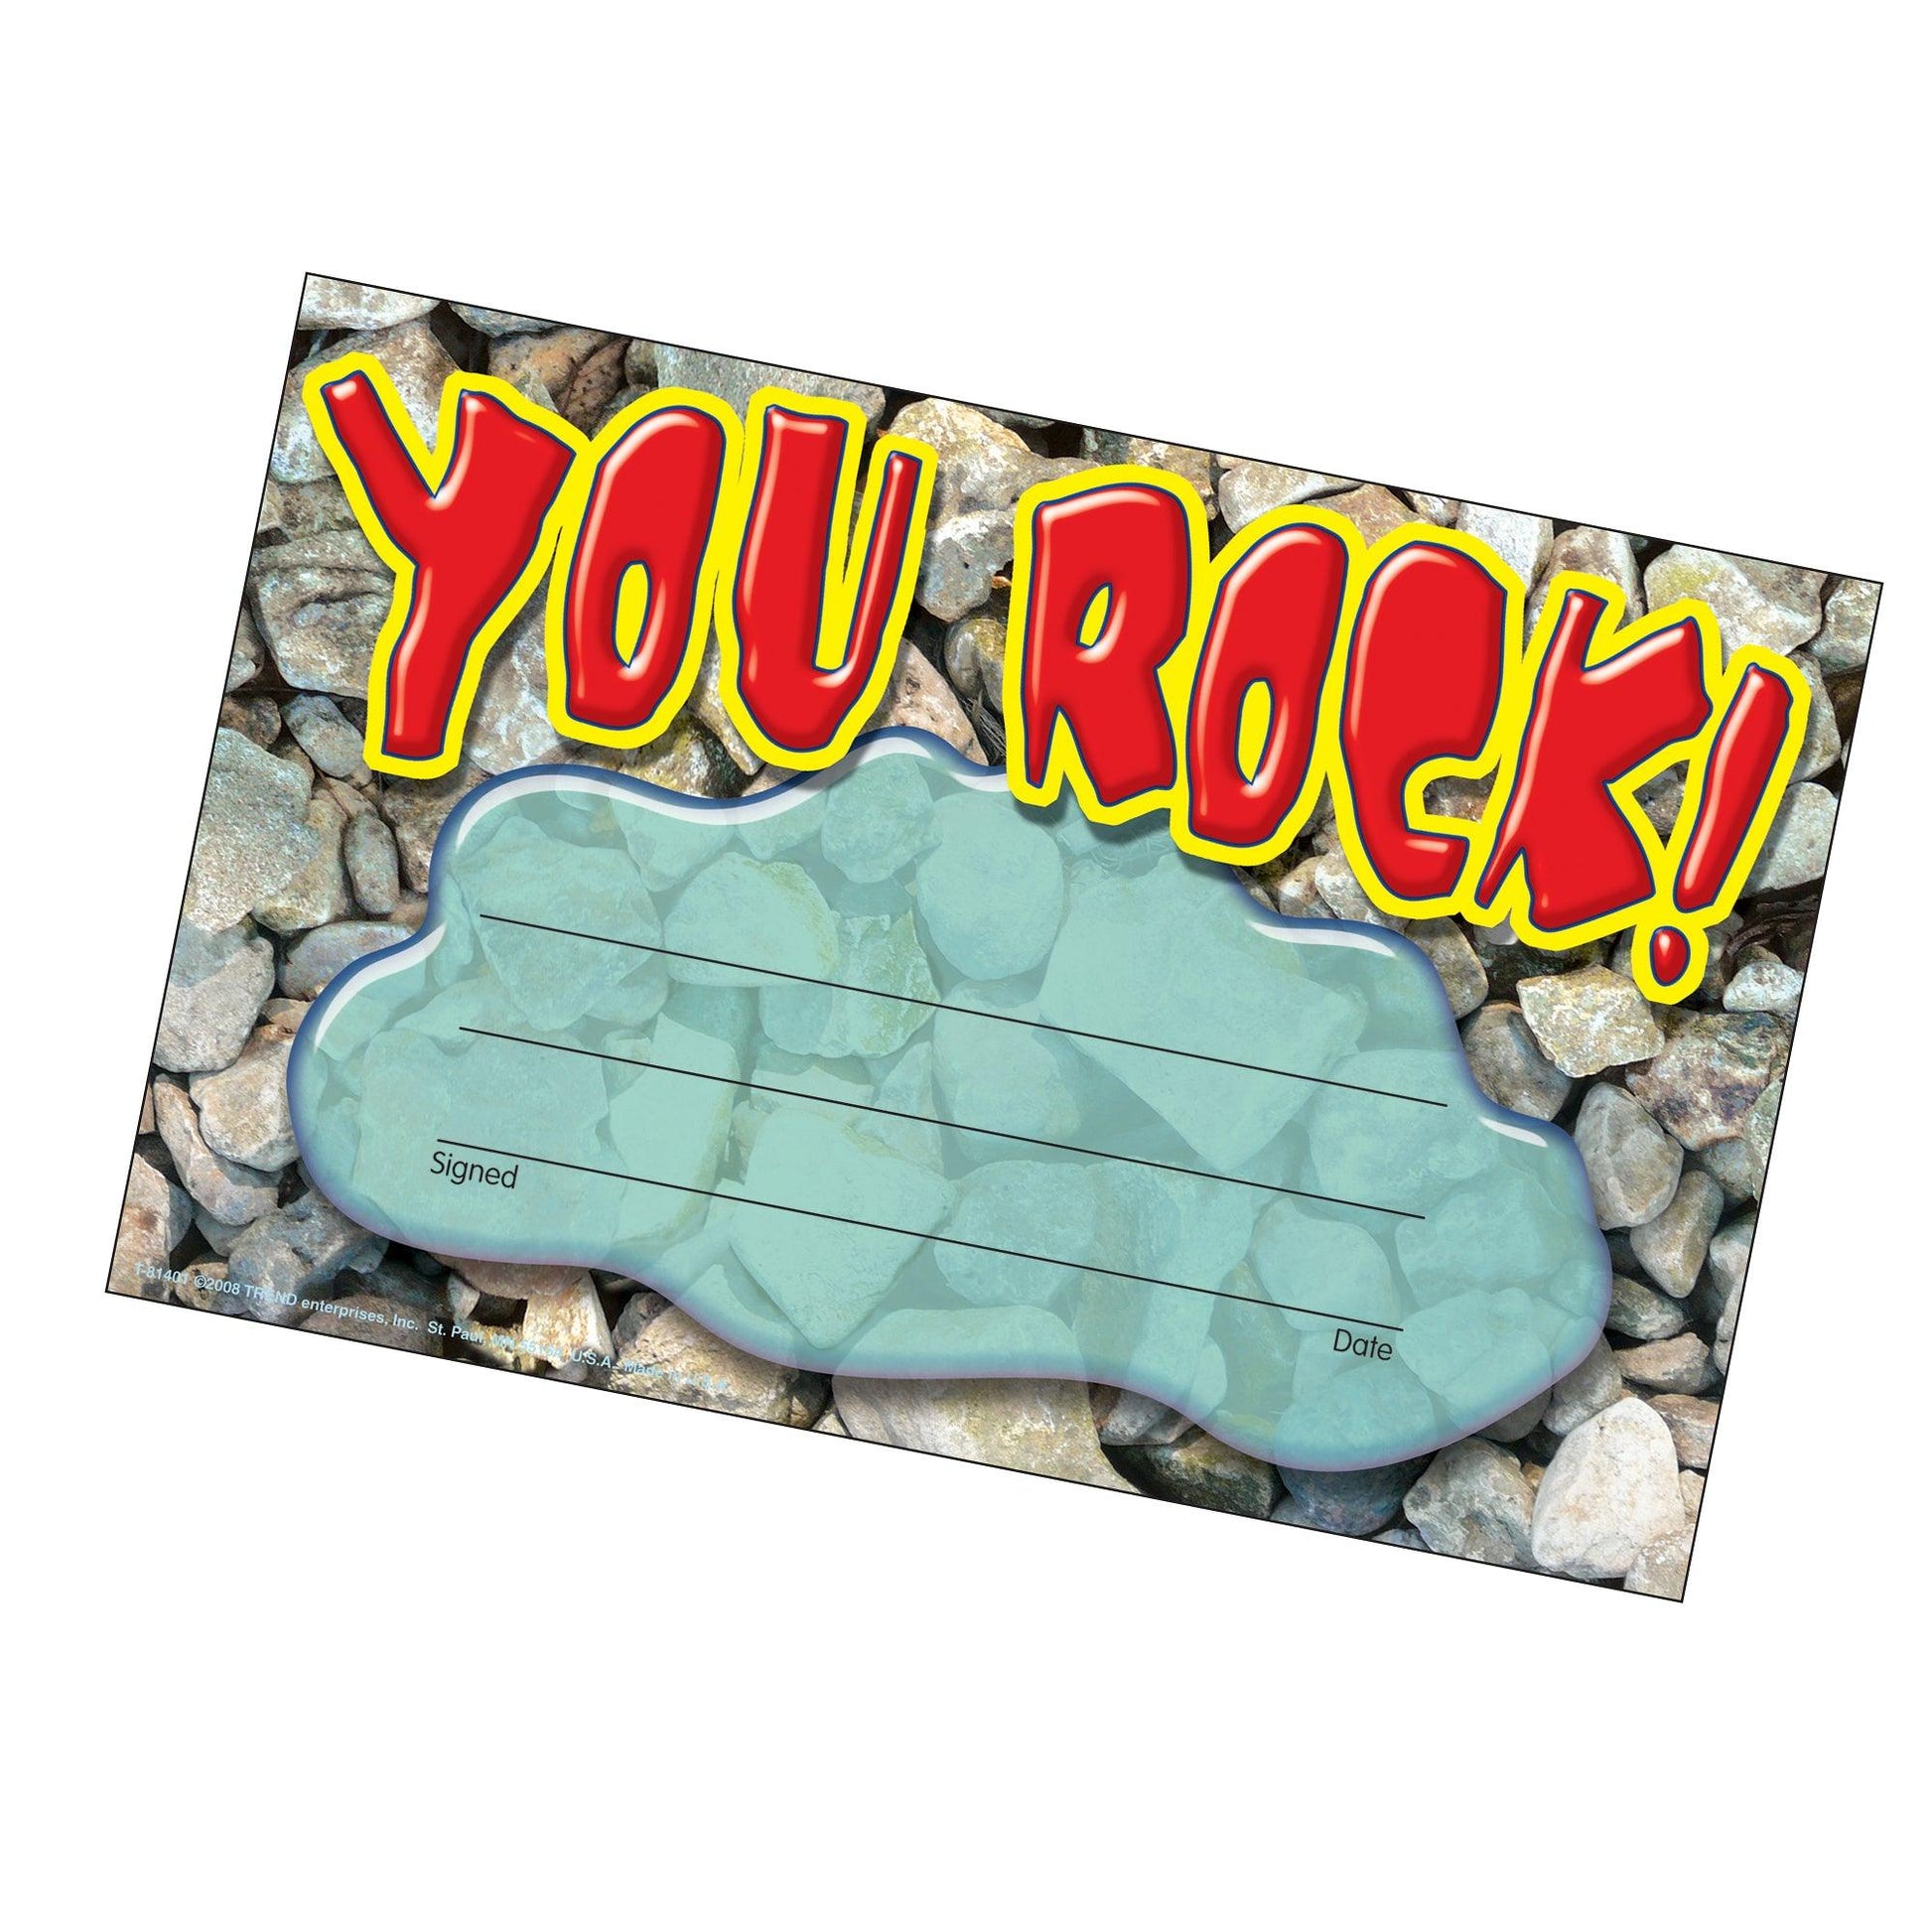 You Rock! Recognition Awards, 30 Per Pack, 6 Packs - Loomini